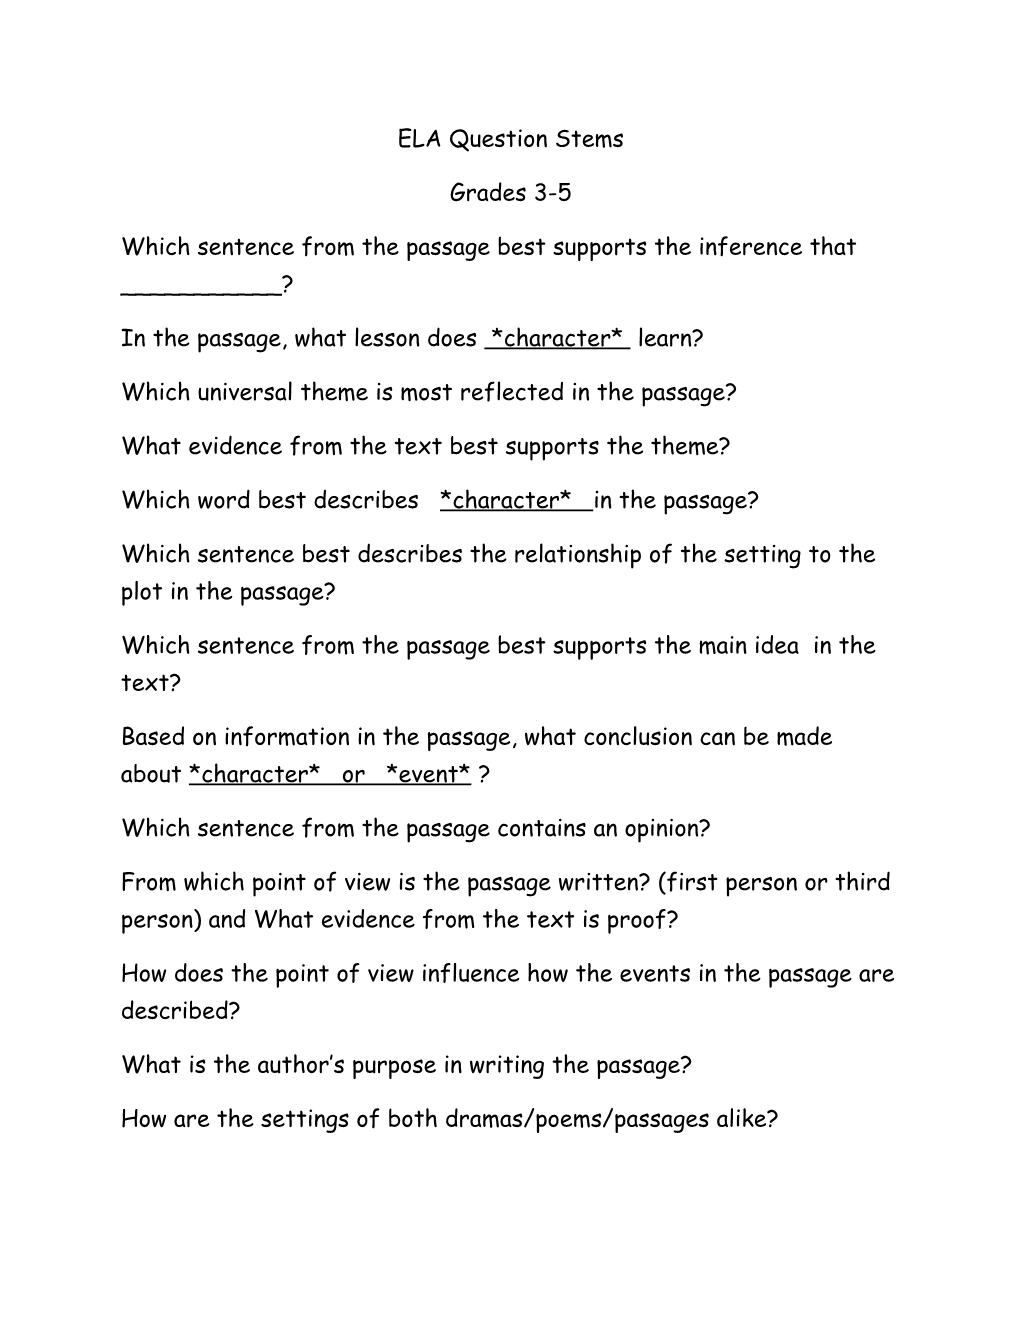 Which Sentence from the Passage Best Supports the Inference That ______?